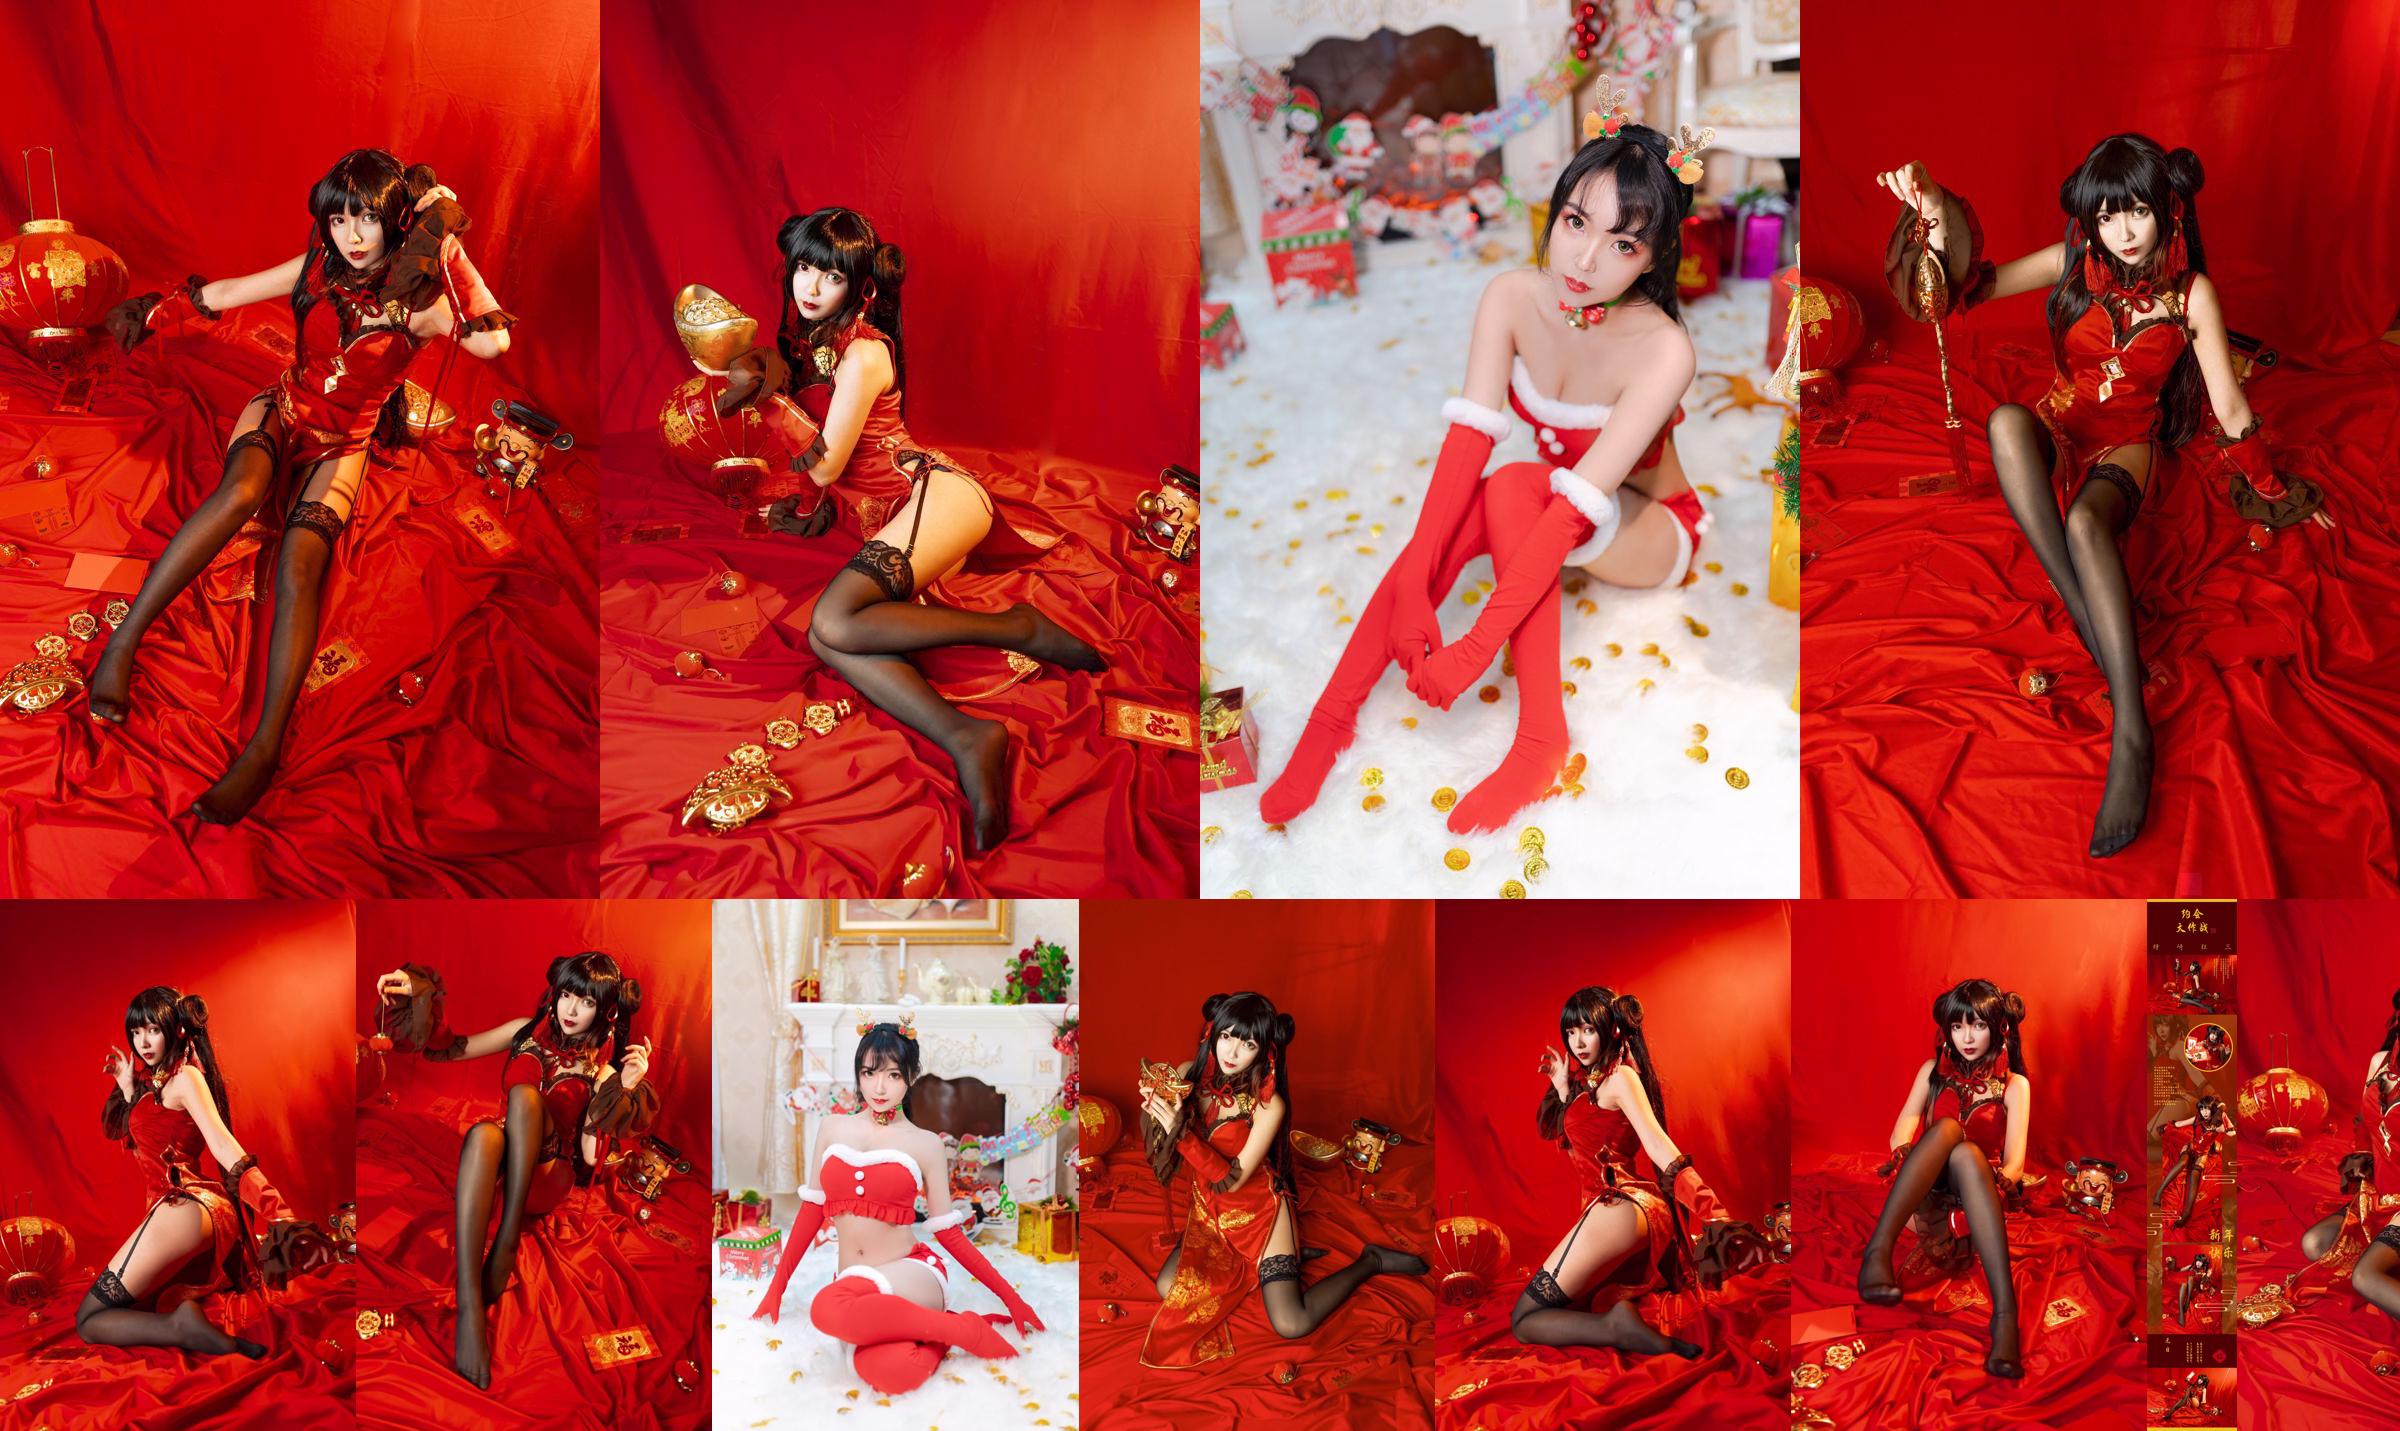 Coser model Yeonko is indestructible "Crazy Three New Year" No.96c11a Page 1